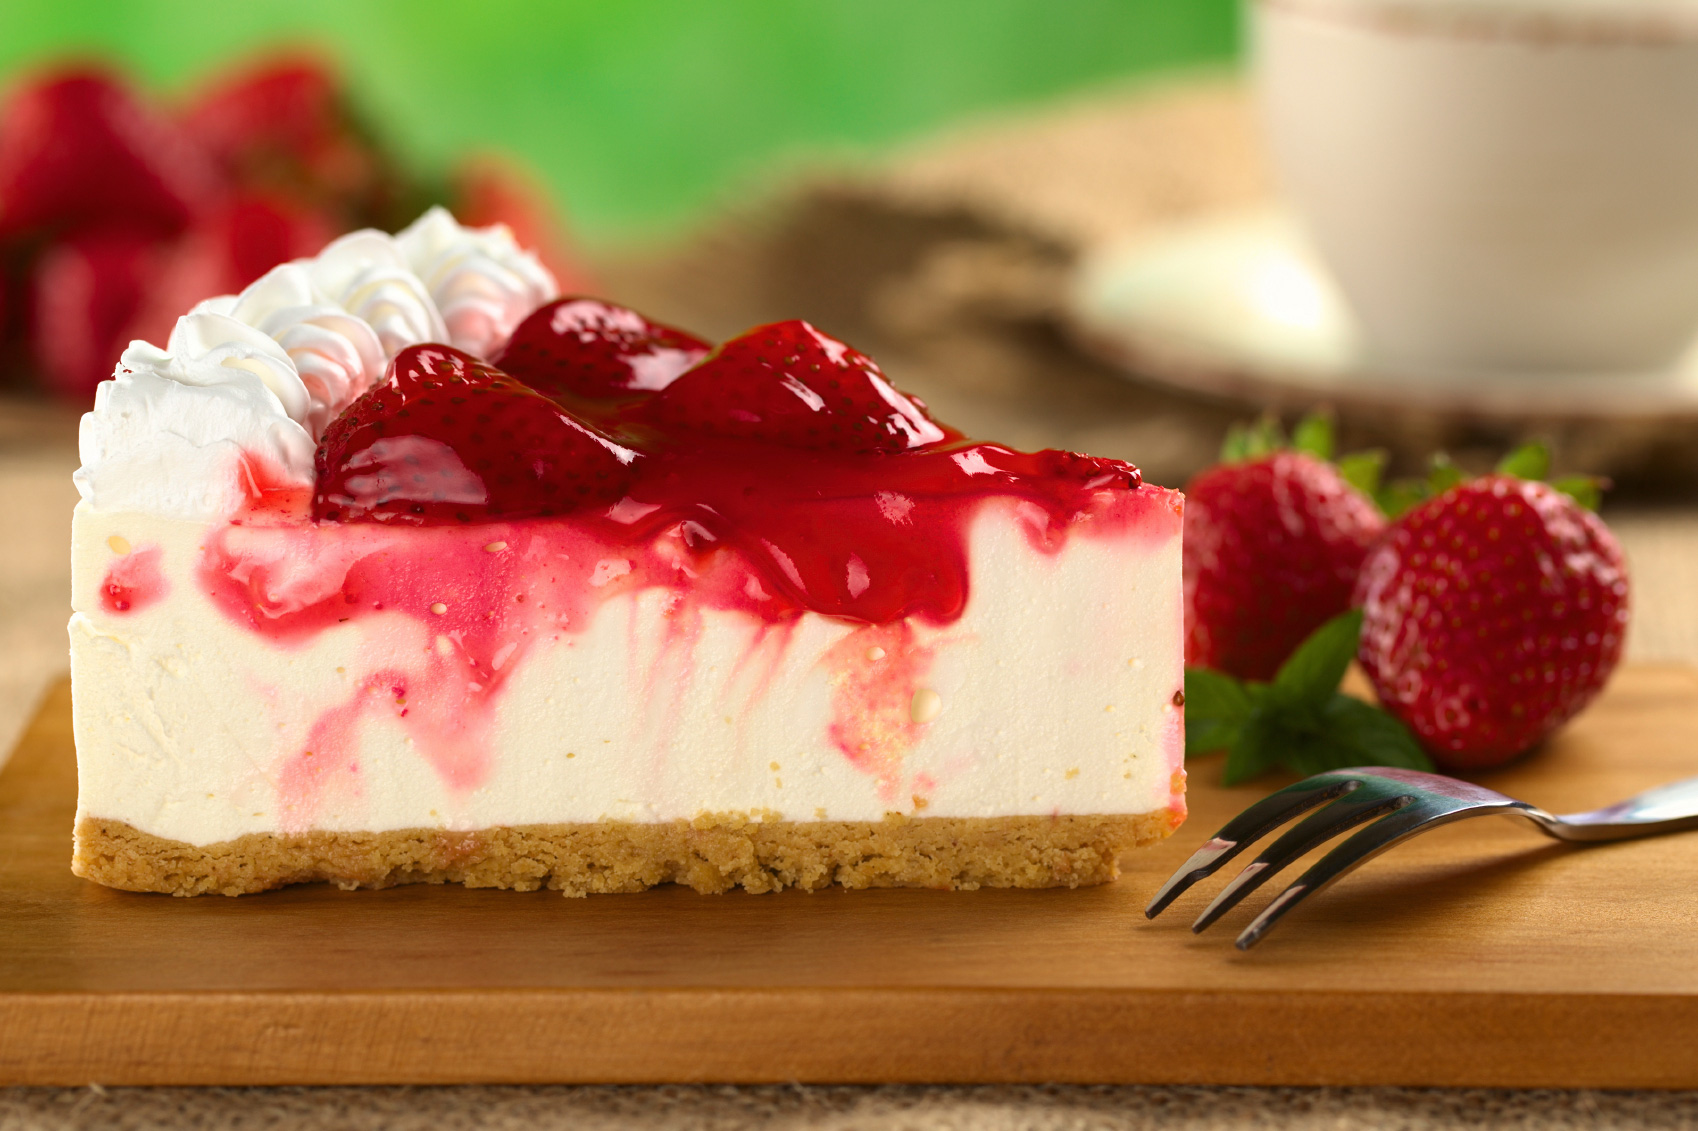 Strawberry-Cheesecake-with-Strawberry-Syrup.jpg